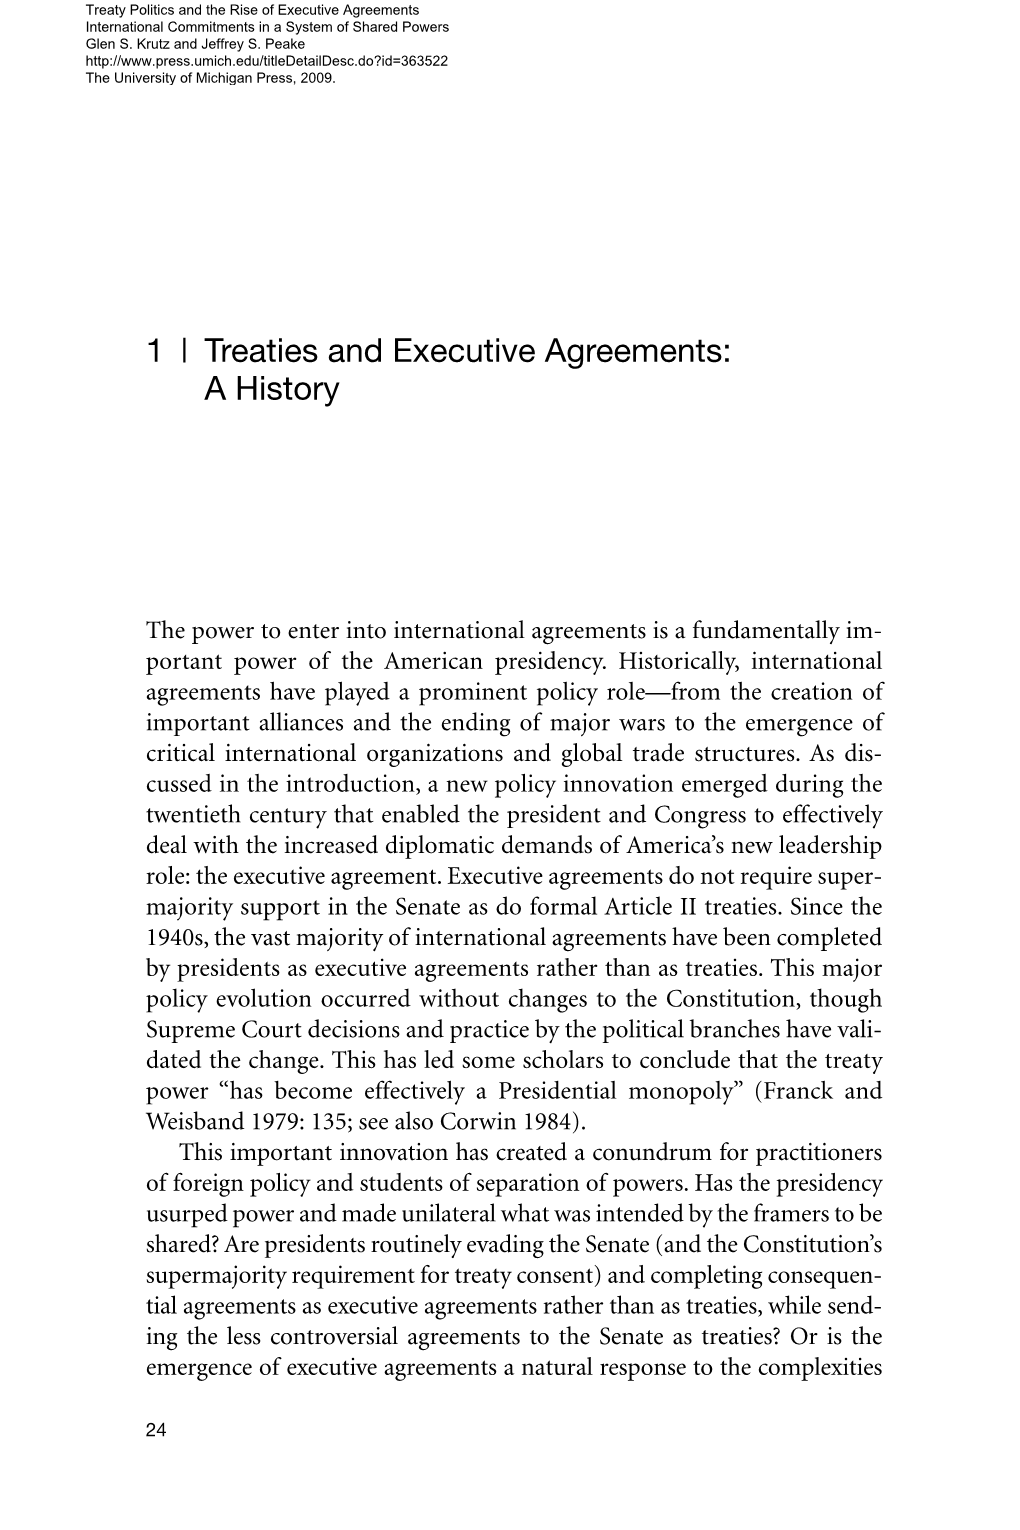 1 | Treaties and Executive Agreements: a History